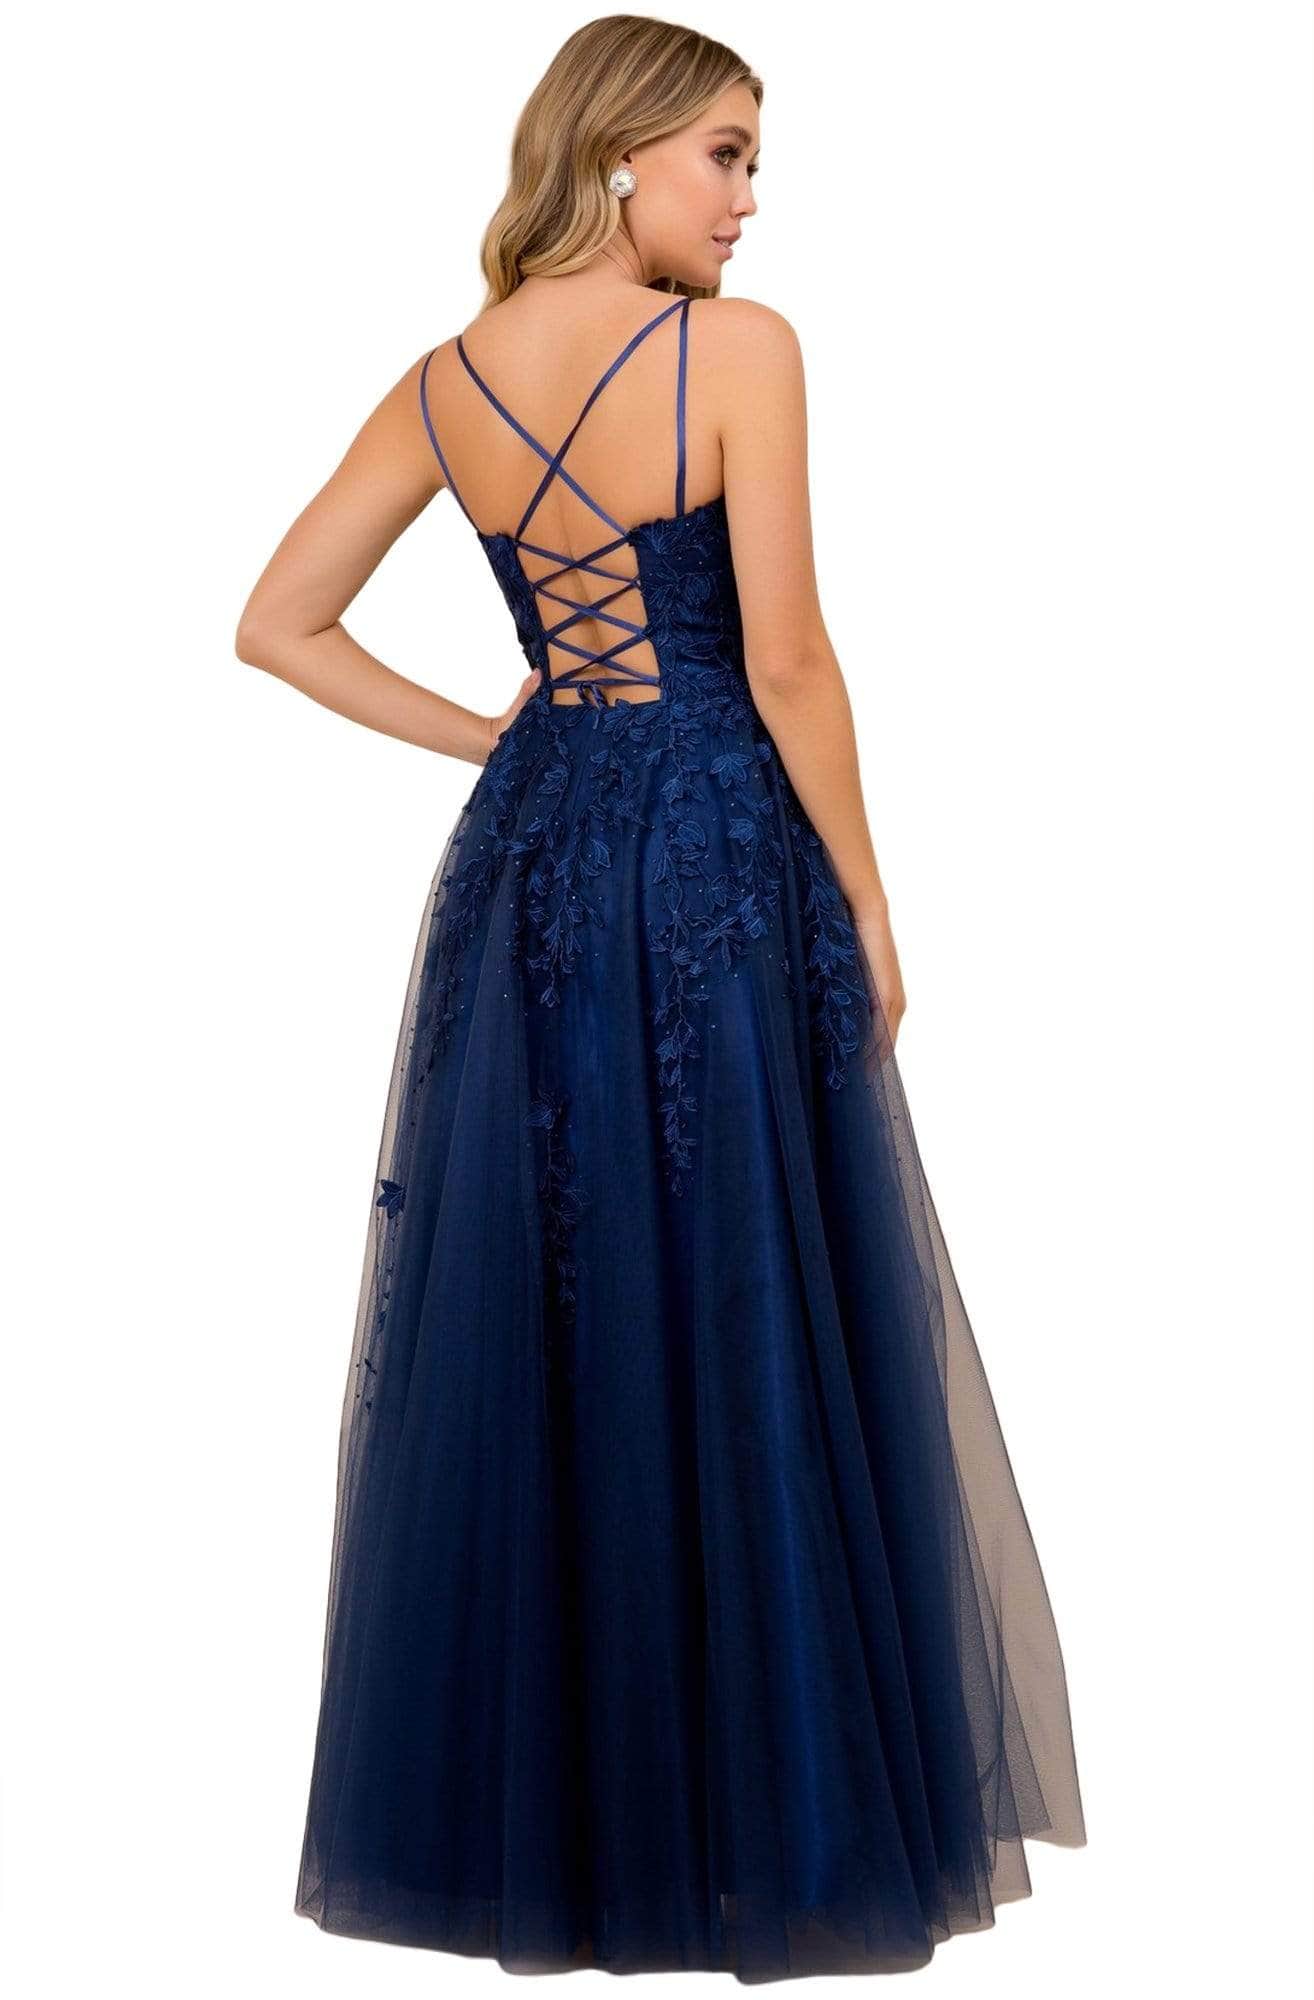 Nox Anabel - C415 Sleeveless Floral Embellishments Long Gown - 1 pc Navy Blue In Size 10 Available CCSALE 10 / Navy Blue